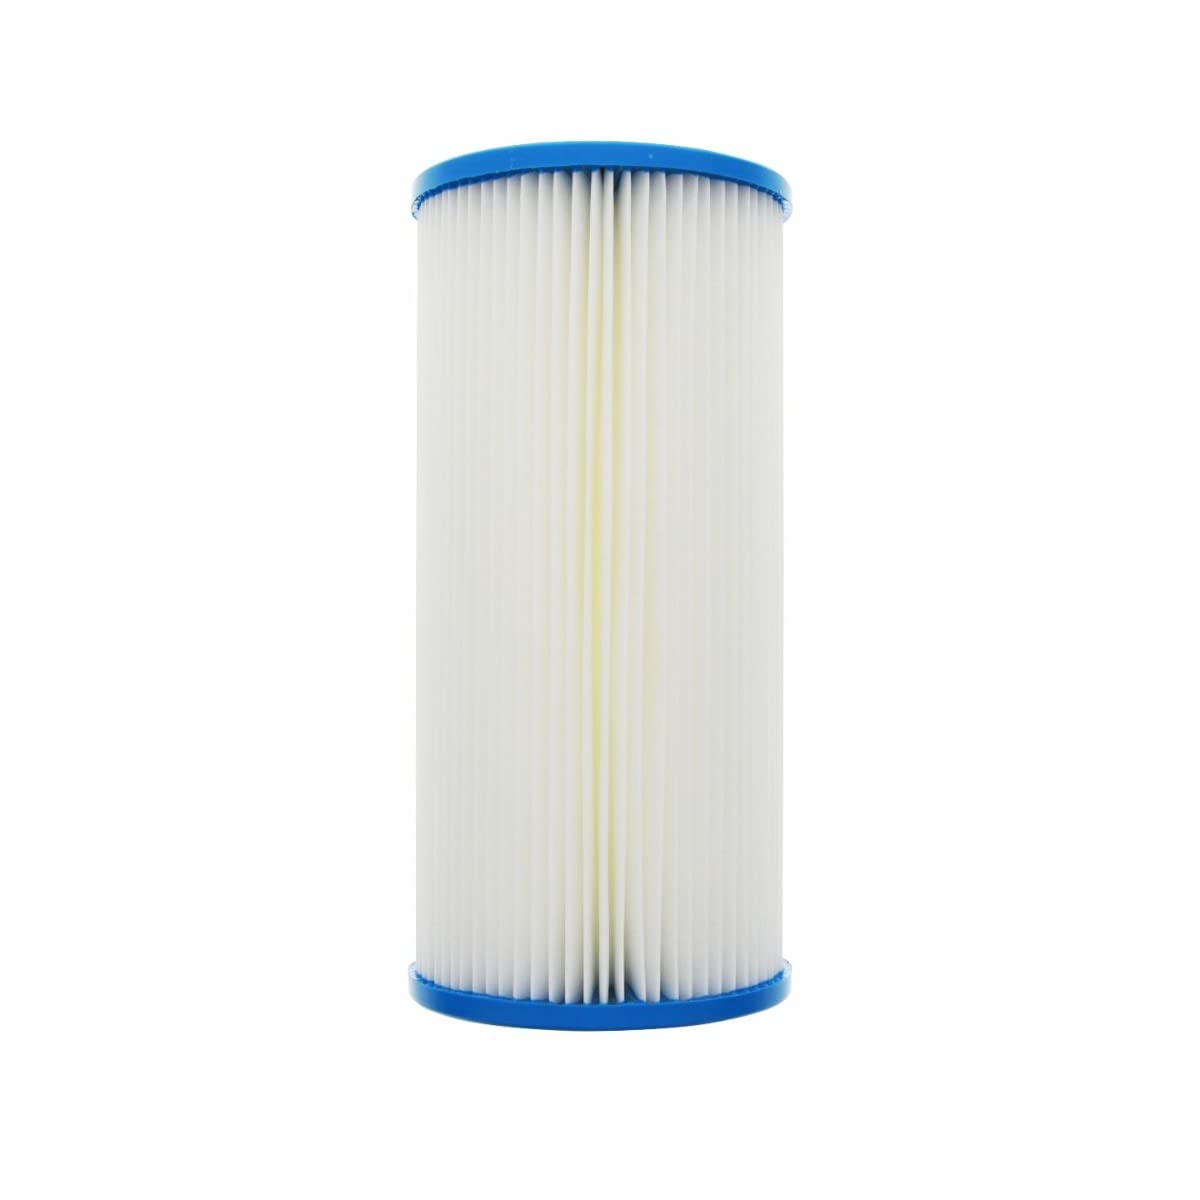 20 Micron 10 Inch x 4.5 Inch | 4-Pack Pleated Polyester Whole House Sediment Cartridge | Compatible with Watts FM-BB-10-20, Pentek S1-BB, Hydronix SPC-45-1020 | Made in the USA, US Water Filters